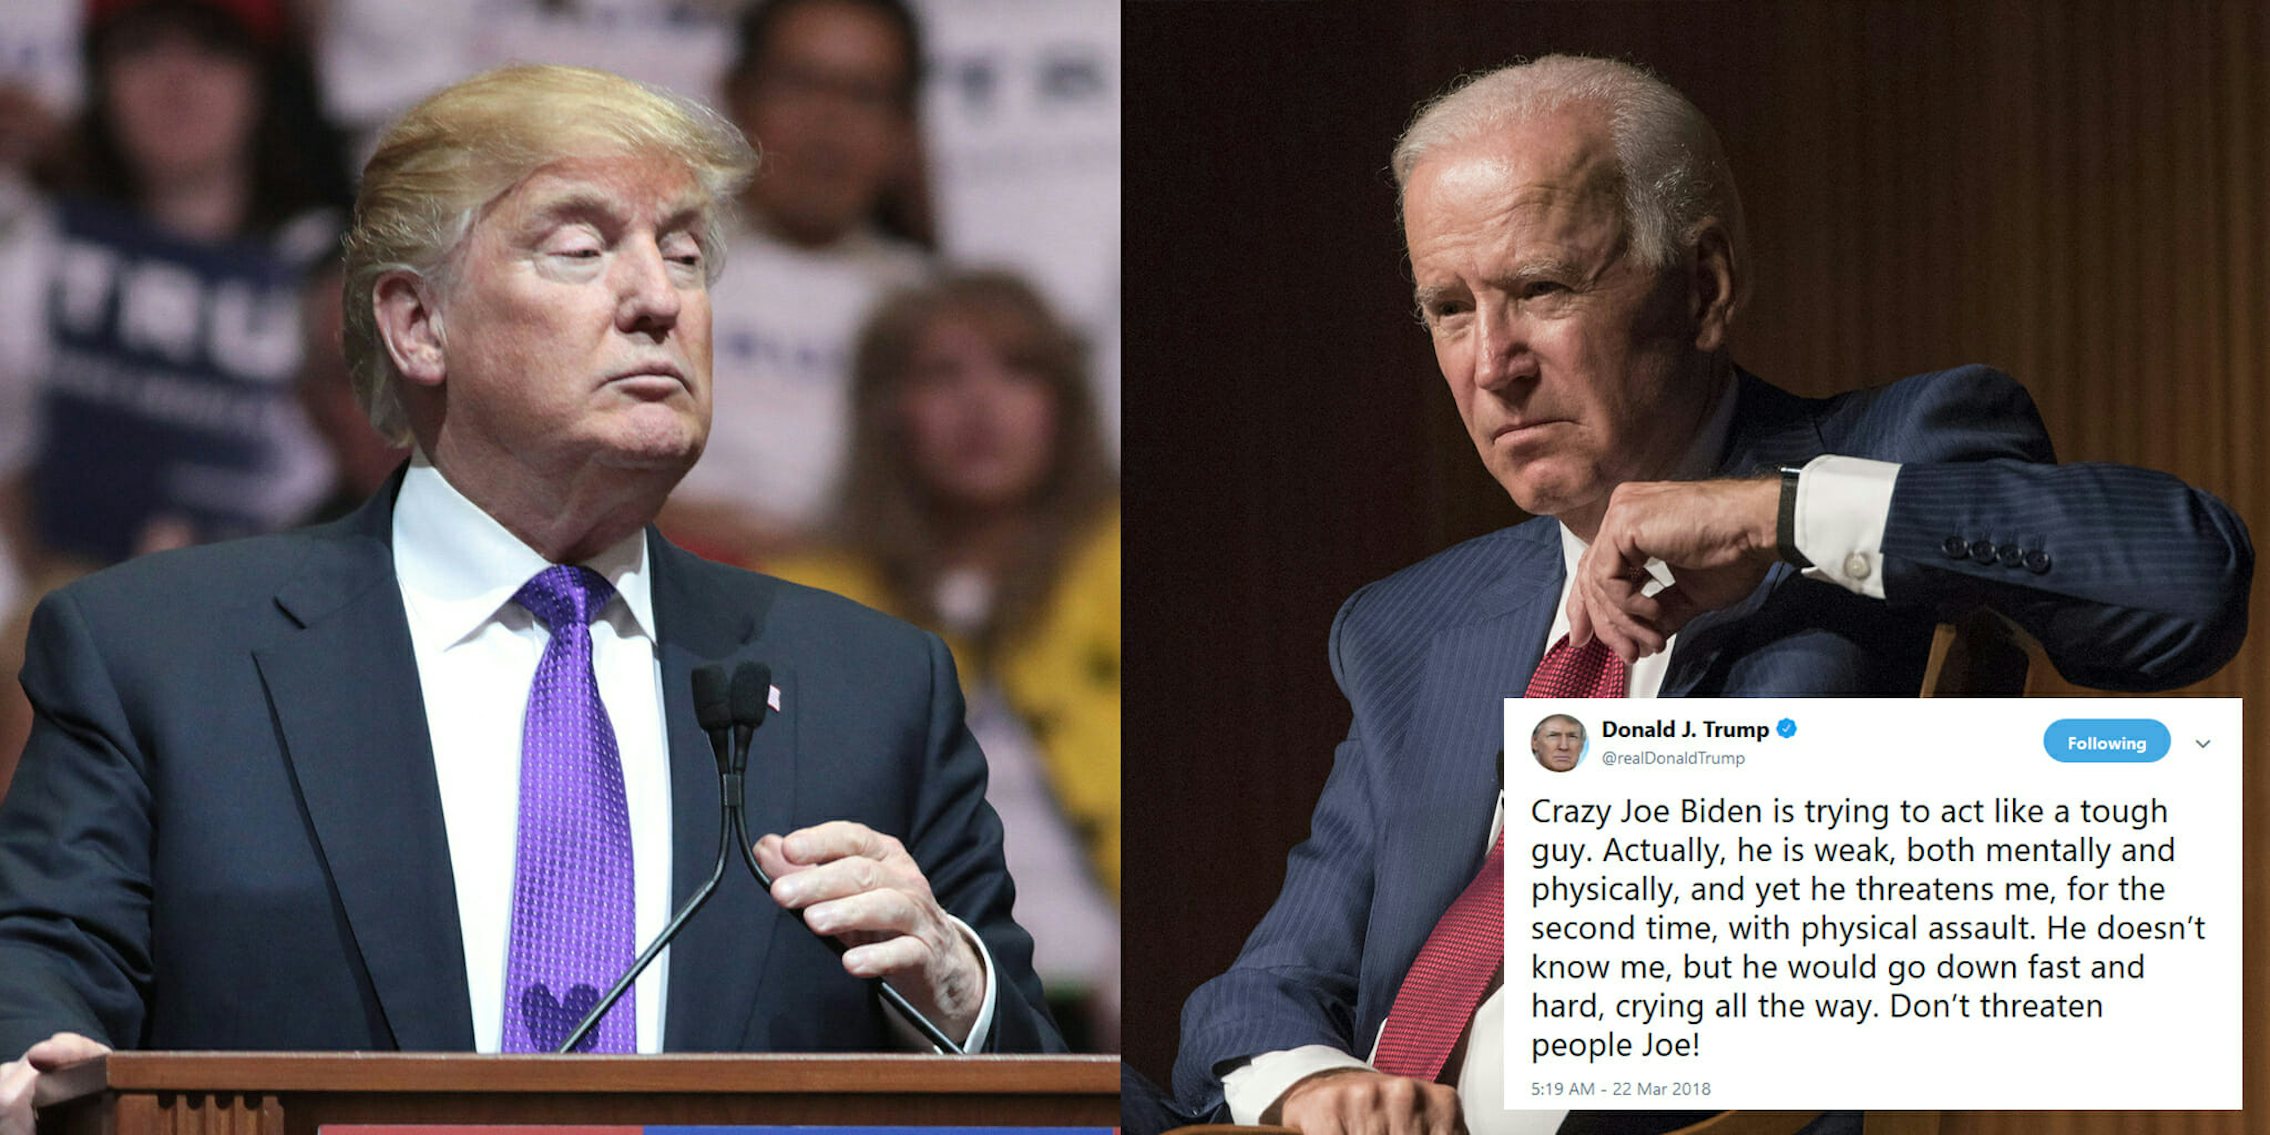 President Donald Trump on Thursday tweeted that he'd beat Joe Biden in a fight. Not a hypothetical 2020 presidential election match-up–a physical fisticuffs.